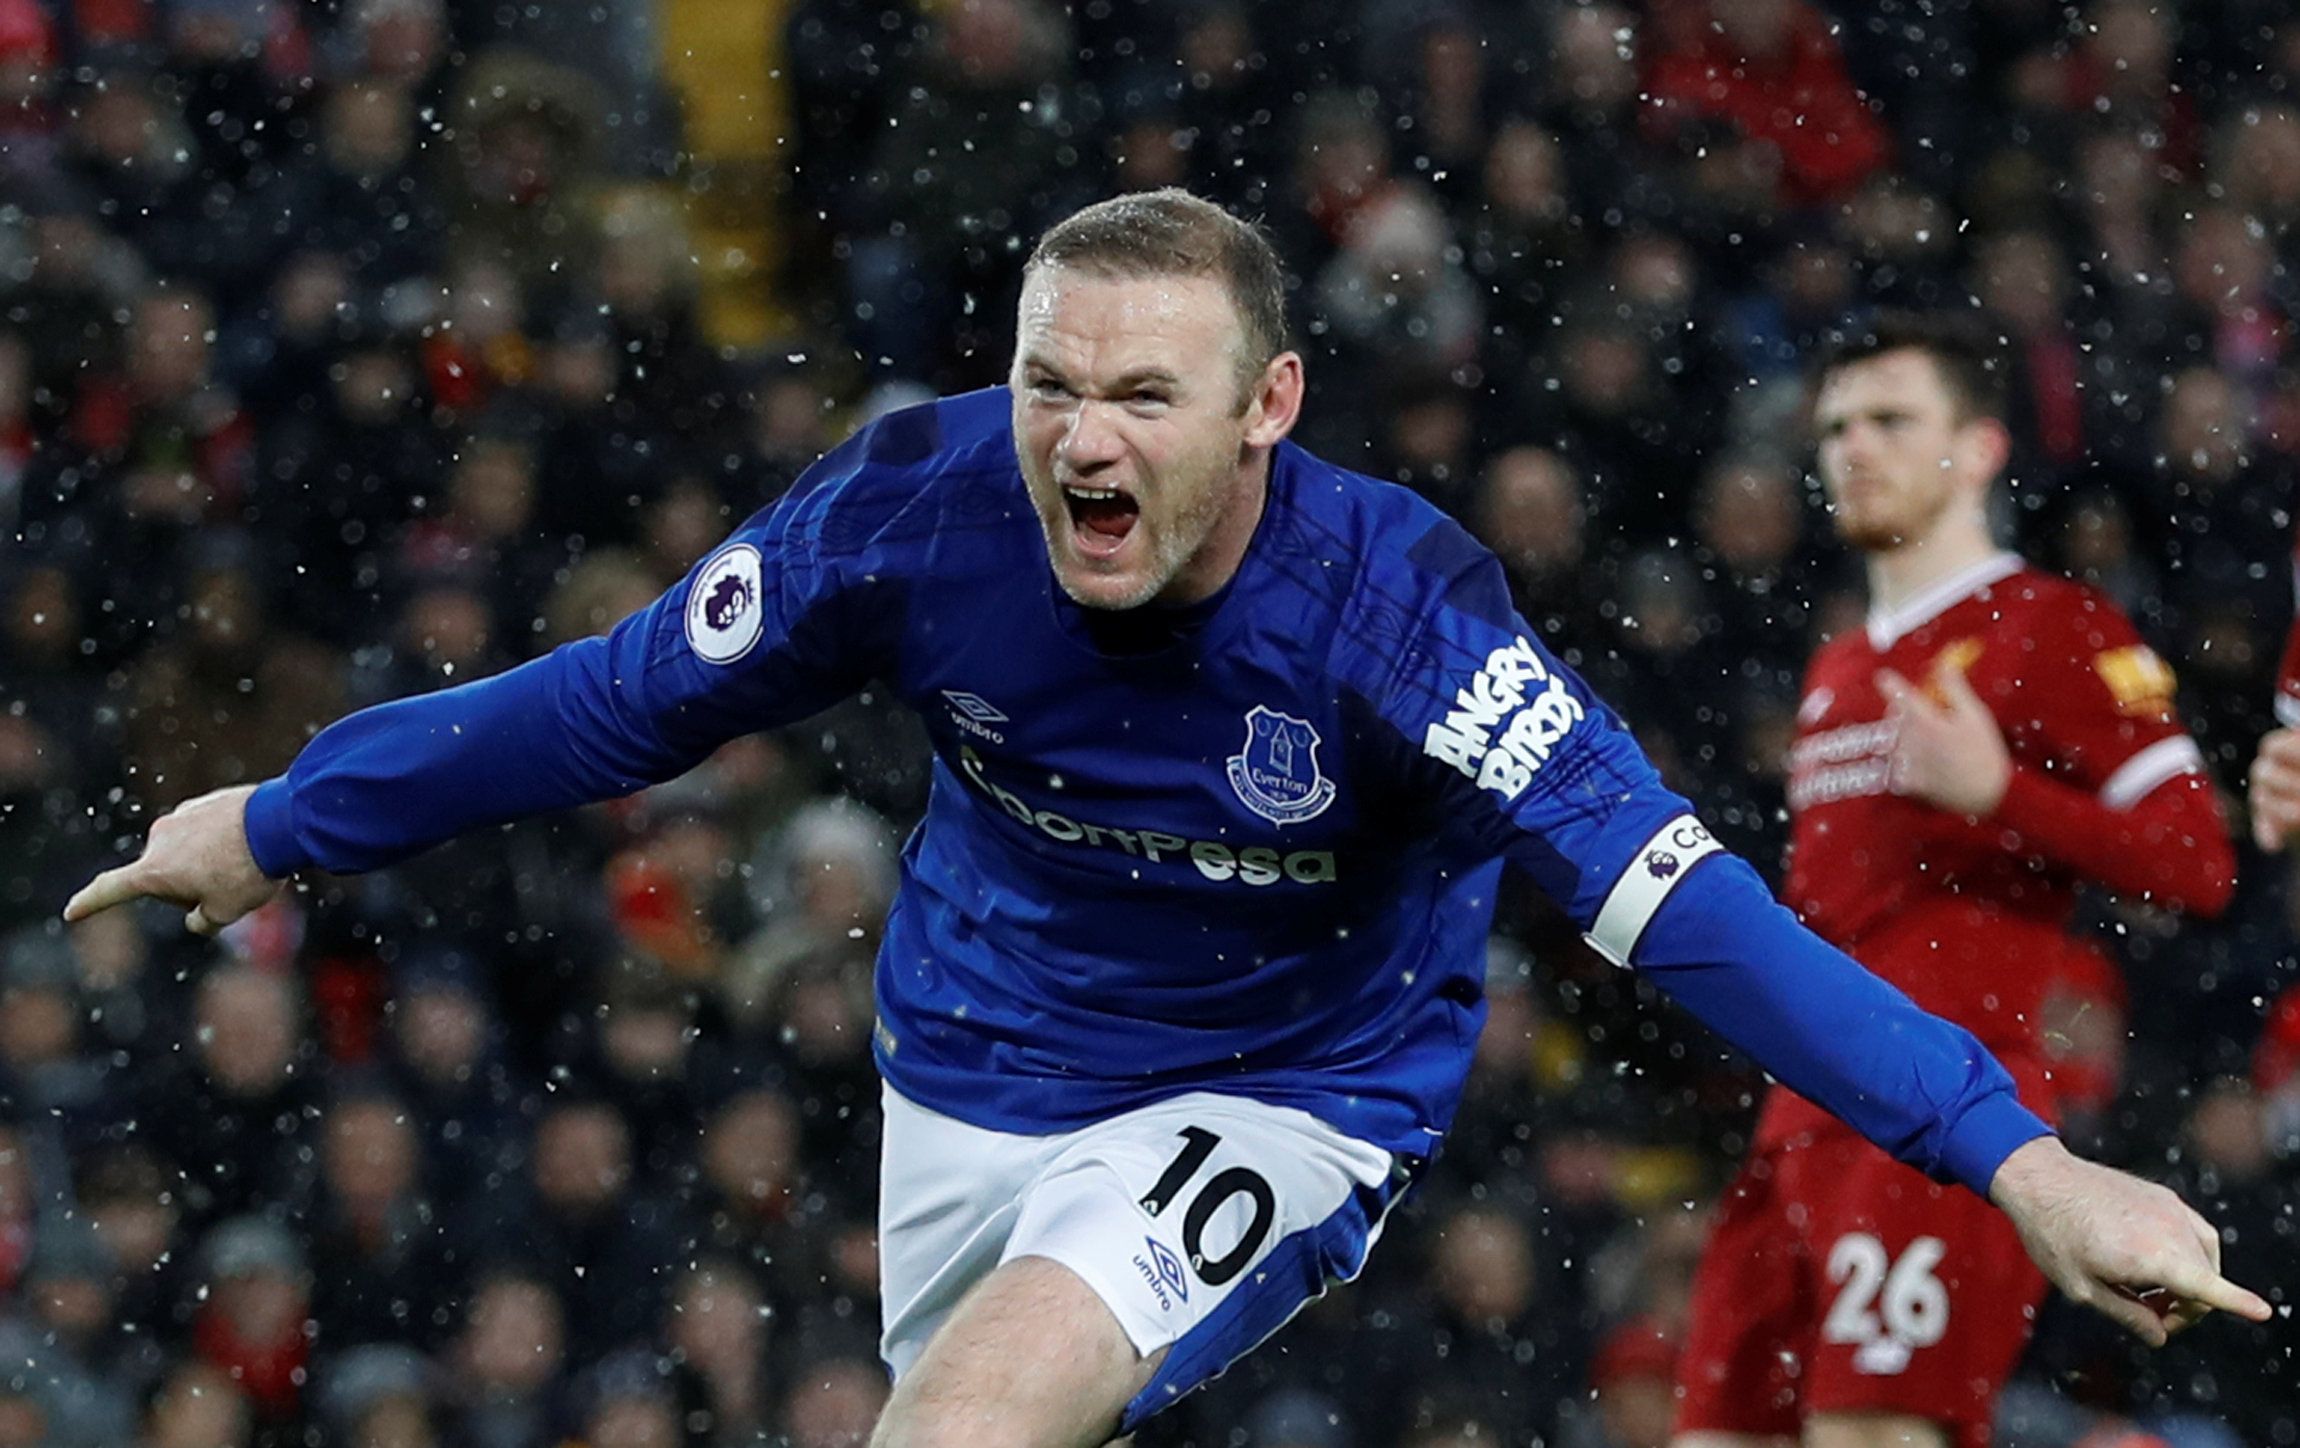 Soccer Football - Premier League - Liverpool vs Everton - Anfield, Liverpool, Britain - December 10, 2017   Everton's Wayne Rooney celebrates scoring their first goal             Action Images via Reuters/Lee Smith    EDITORIAL USE ONLY. No use with unauthorized audio, video, data, fixture lists, club/league logos or "live" services. Online in-match use limited to 75 images, no video emulation. No use in betting, games or single club/league/player publications. Please contact your account repres